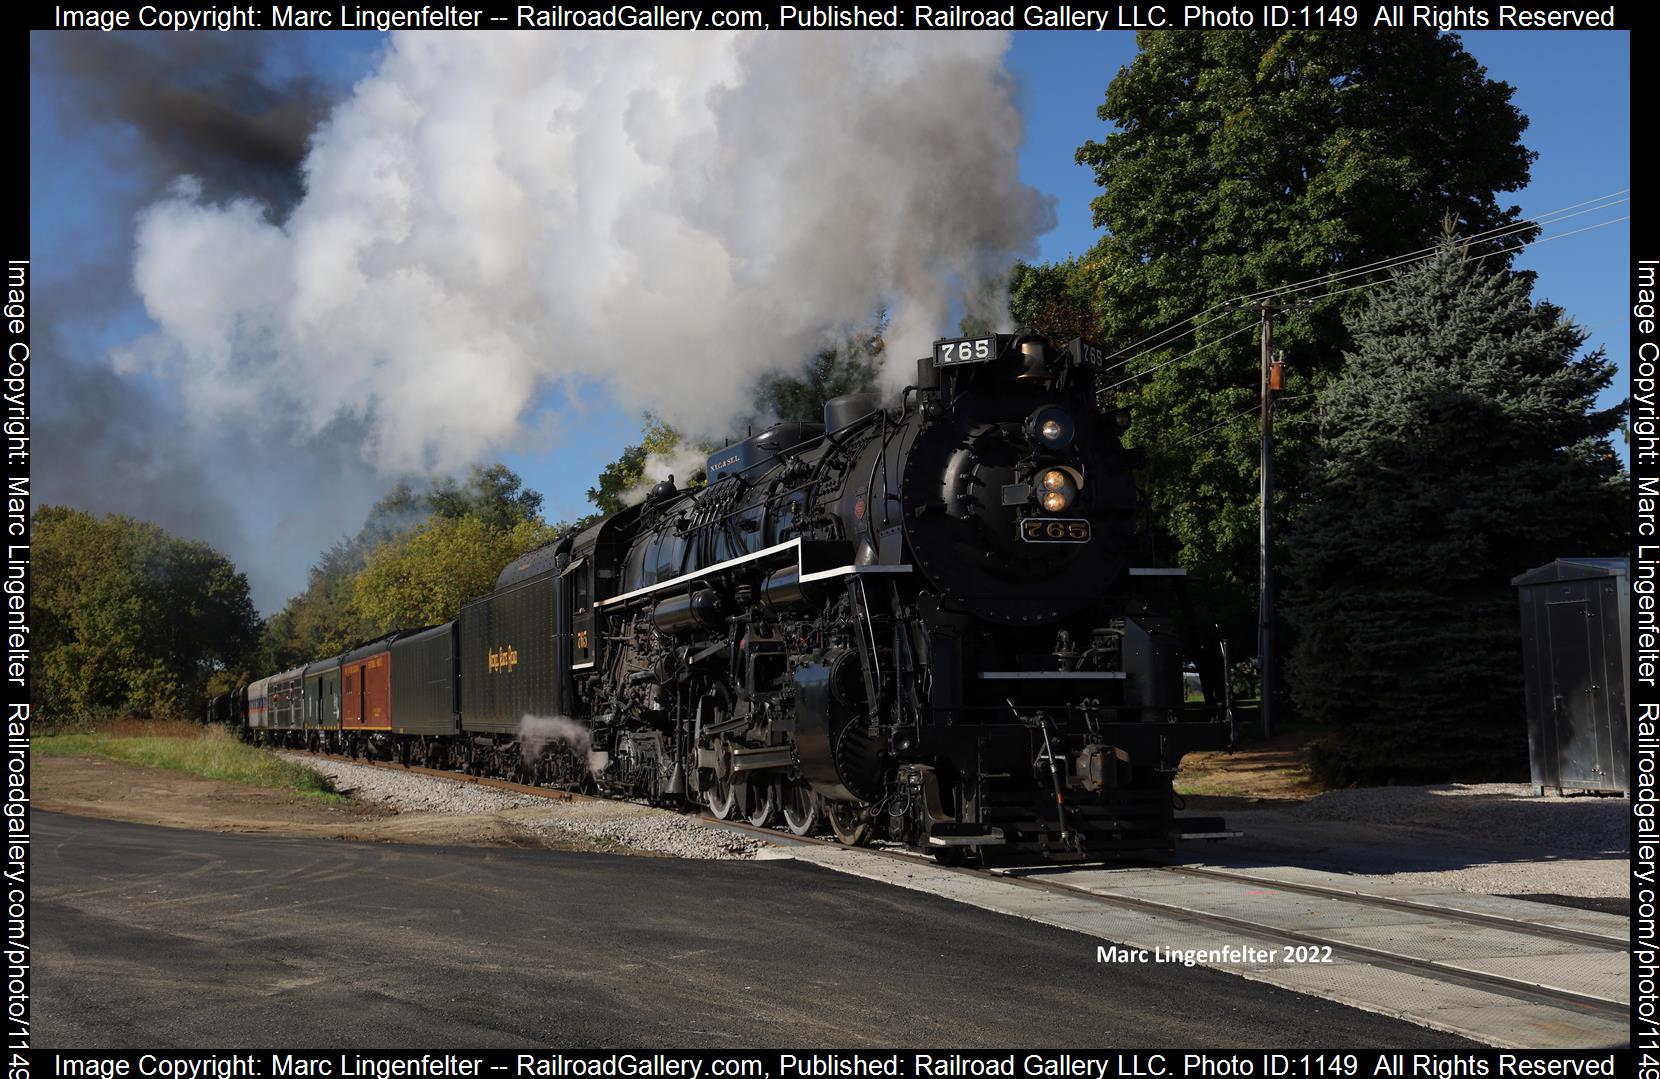 NKP 765 is a class Steam 2-8-4 and  is pictured in Fremont, Indiana, USA.  This was taken along the Indiana Northeastern Railroad Main on the Nickel Plate Road. Photo Copyright: Marc Lingenfelter uploaded to Railroad Gallery on 06/18/2023. This photograph of NKP 765 was taken on Saturday, October 01, 2022. All Rights Reserved. 